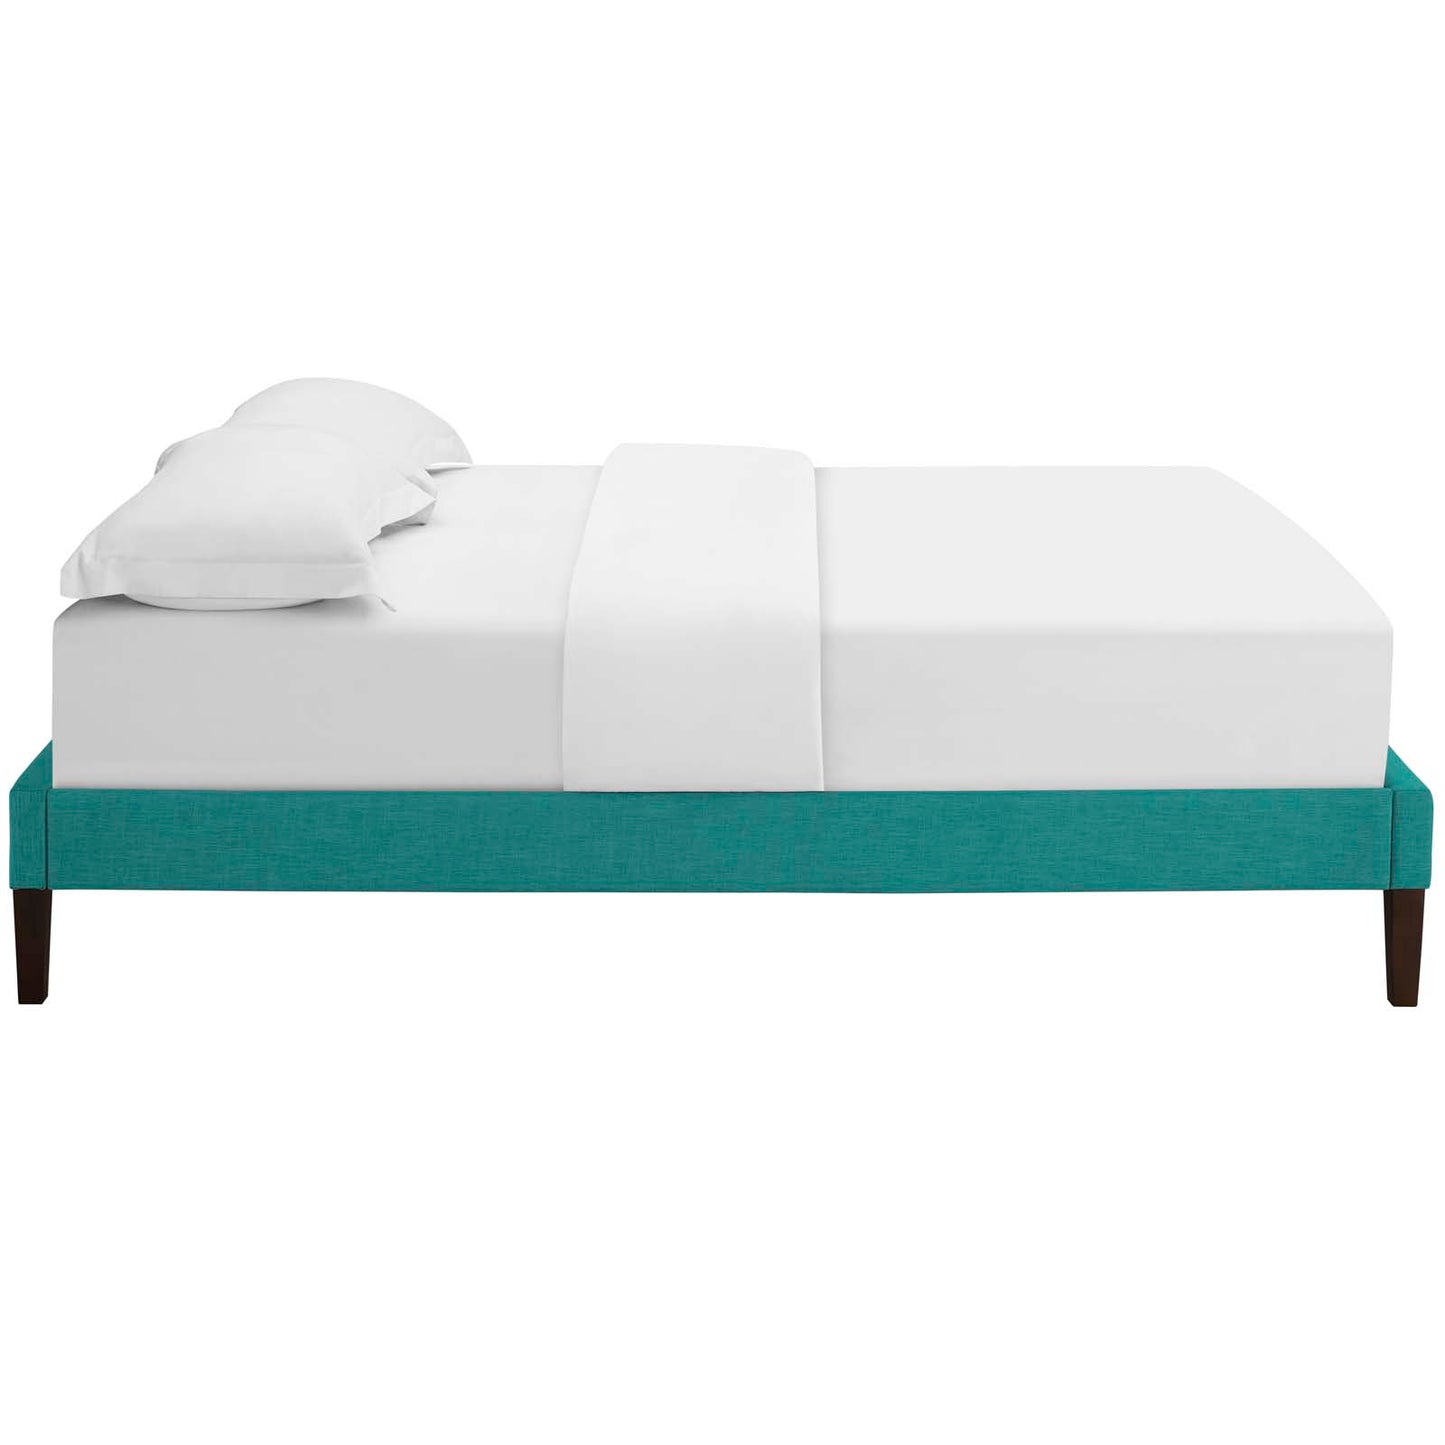 Tessie King Fabric Bed Frame with Squared Tapered Legs Teal MOD-5901-TEA